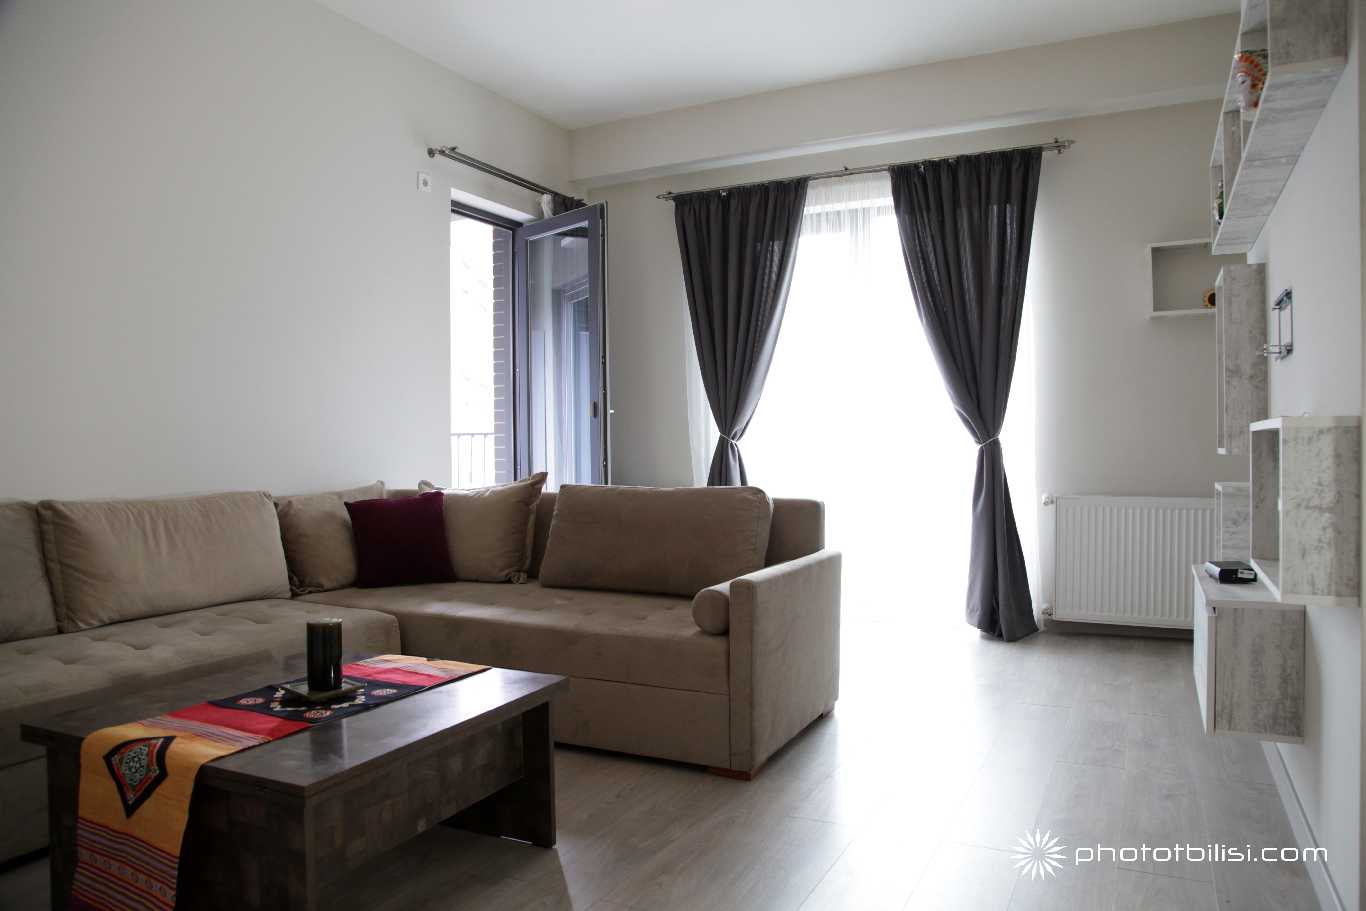 Rent-appartment-in-Tbilisi-IMG_0851